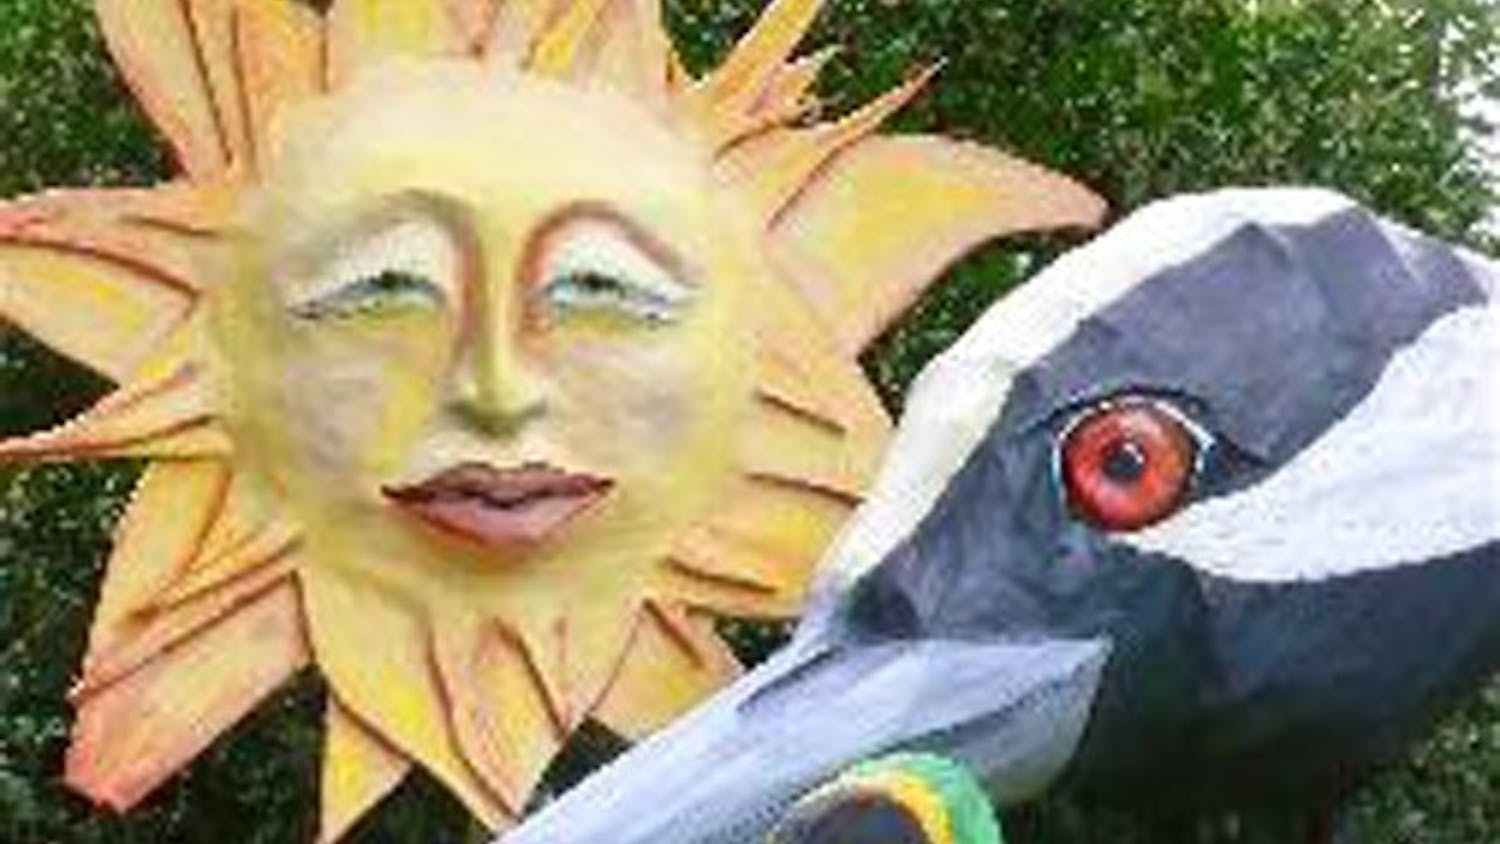 The annual Handmade Parade will take place this Saturday afternoon. The puppets in the parade have steadily gotten larger every year. 

Courtesy of the Hillsborough Arts Council.  